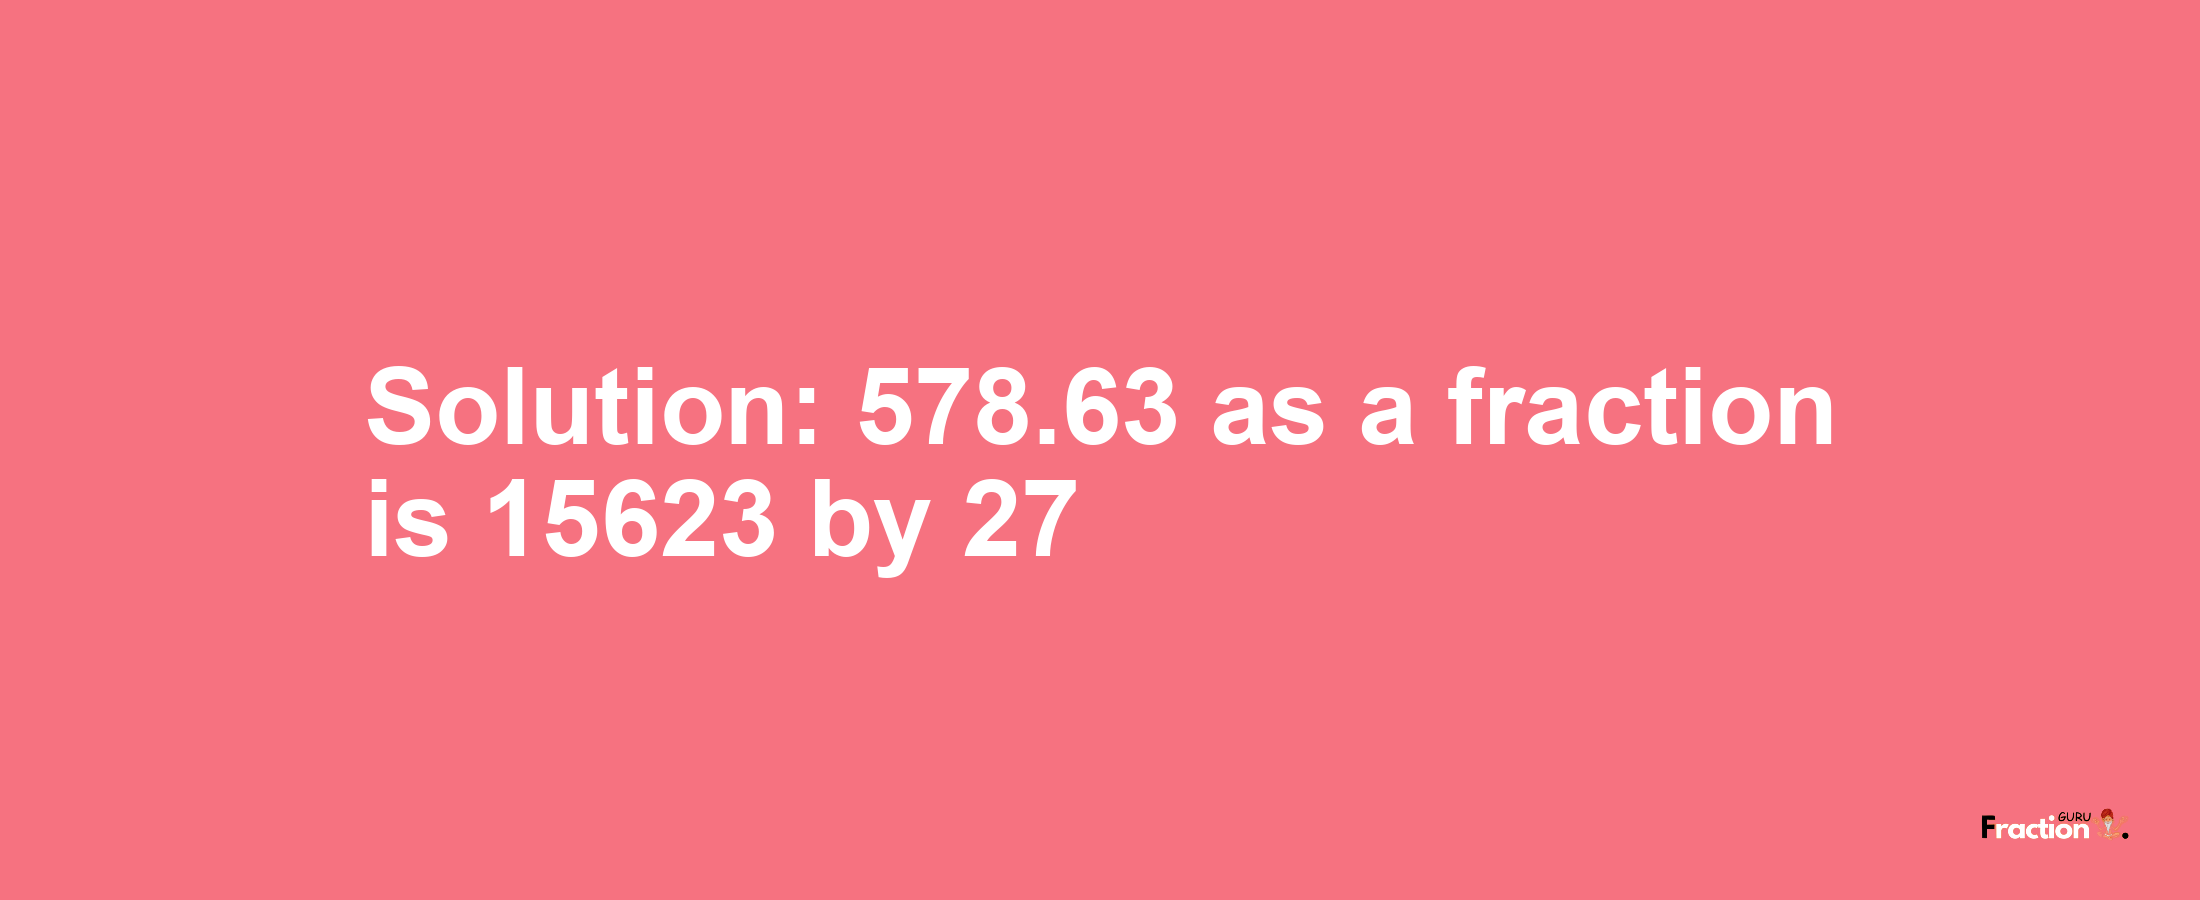 Solution:578.63 as a fraction is 15623/27